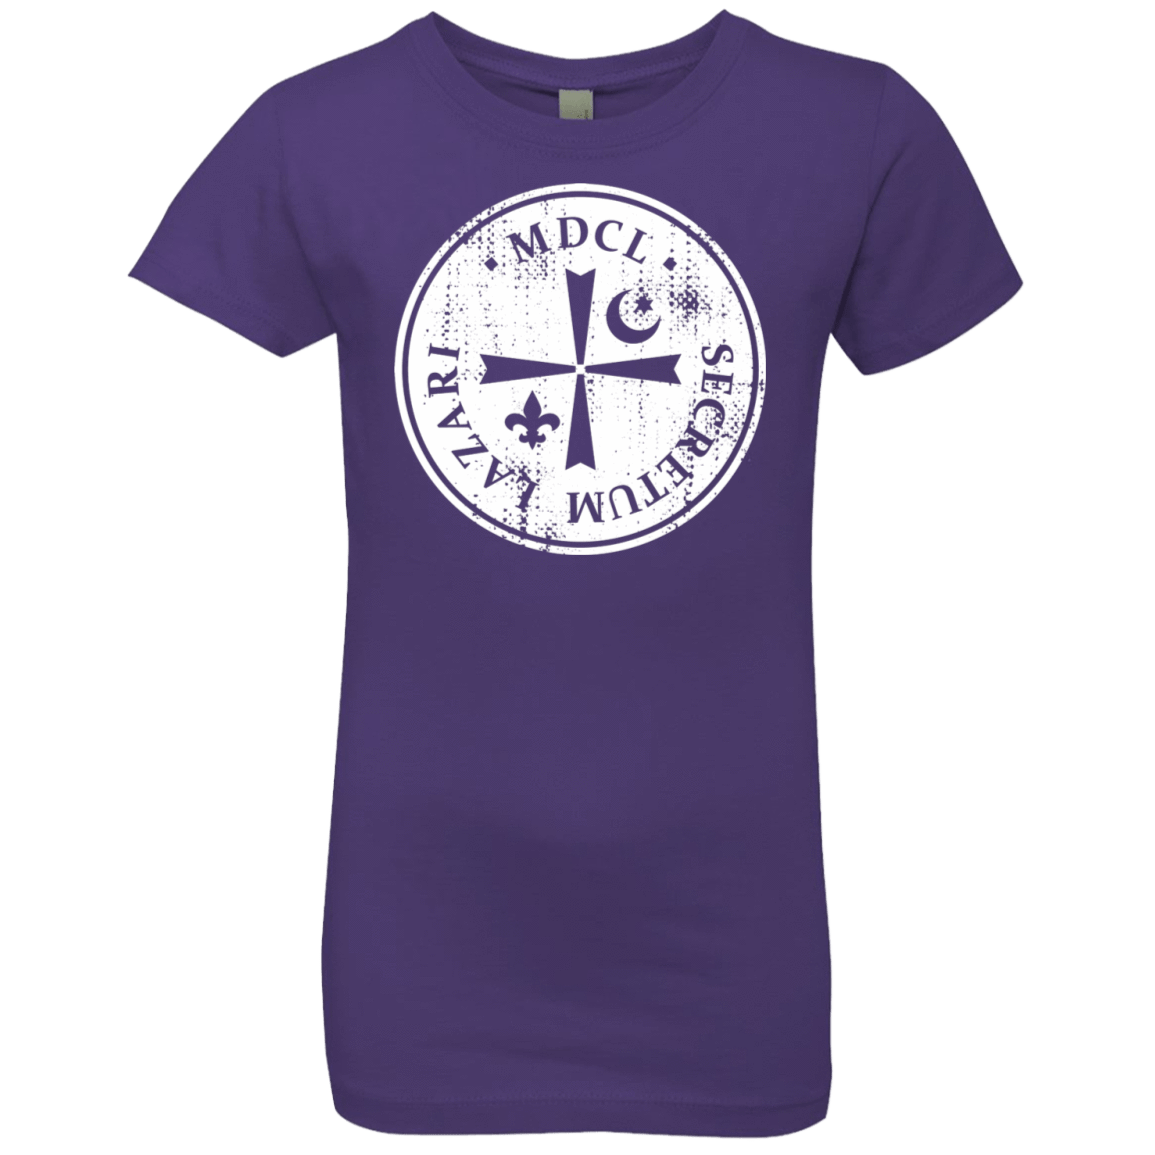 T-Shirts Purple Rush / YXS A Discovery Of Witches Girls Premium T-Shirt